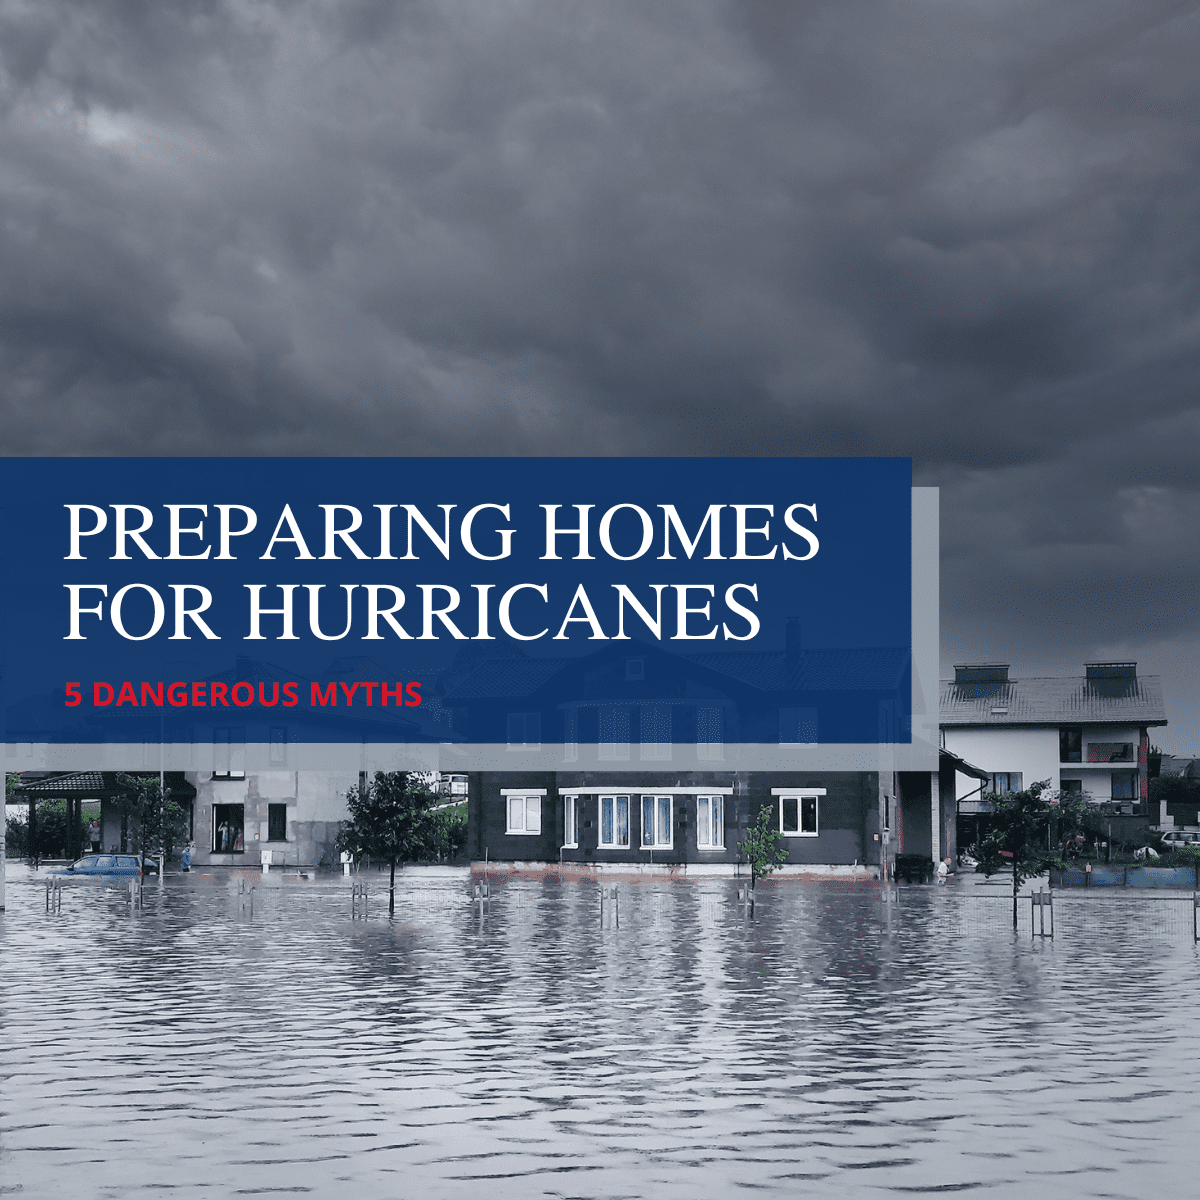 5 Myths About Preparing Homes for Hurricanes